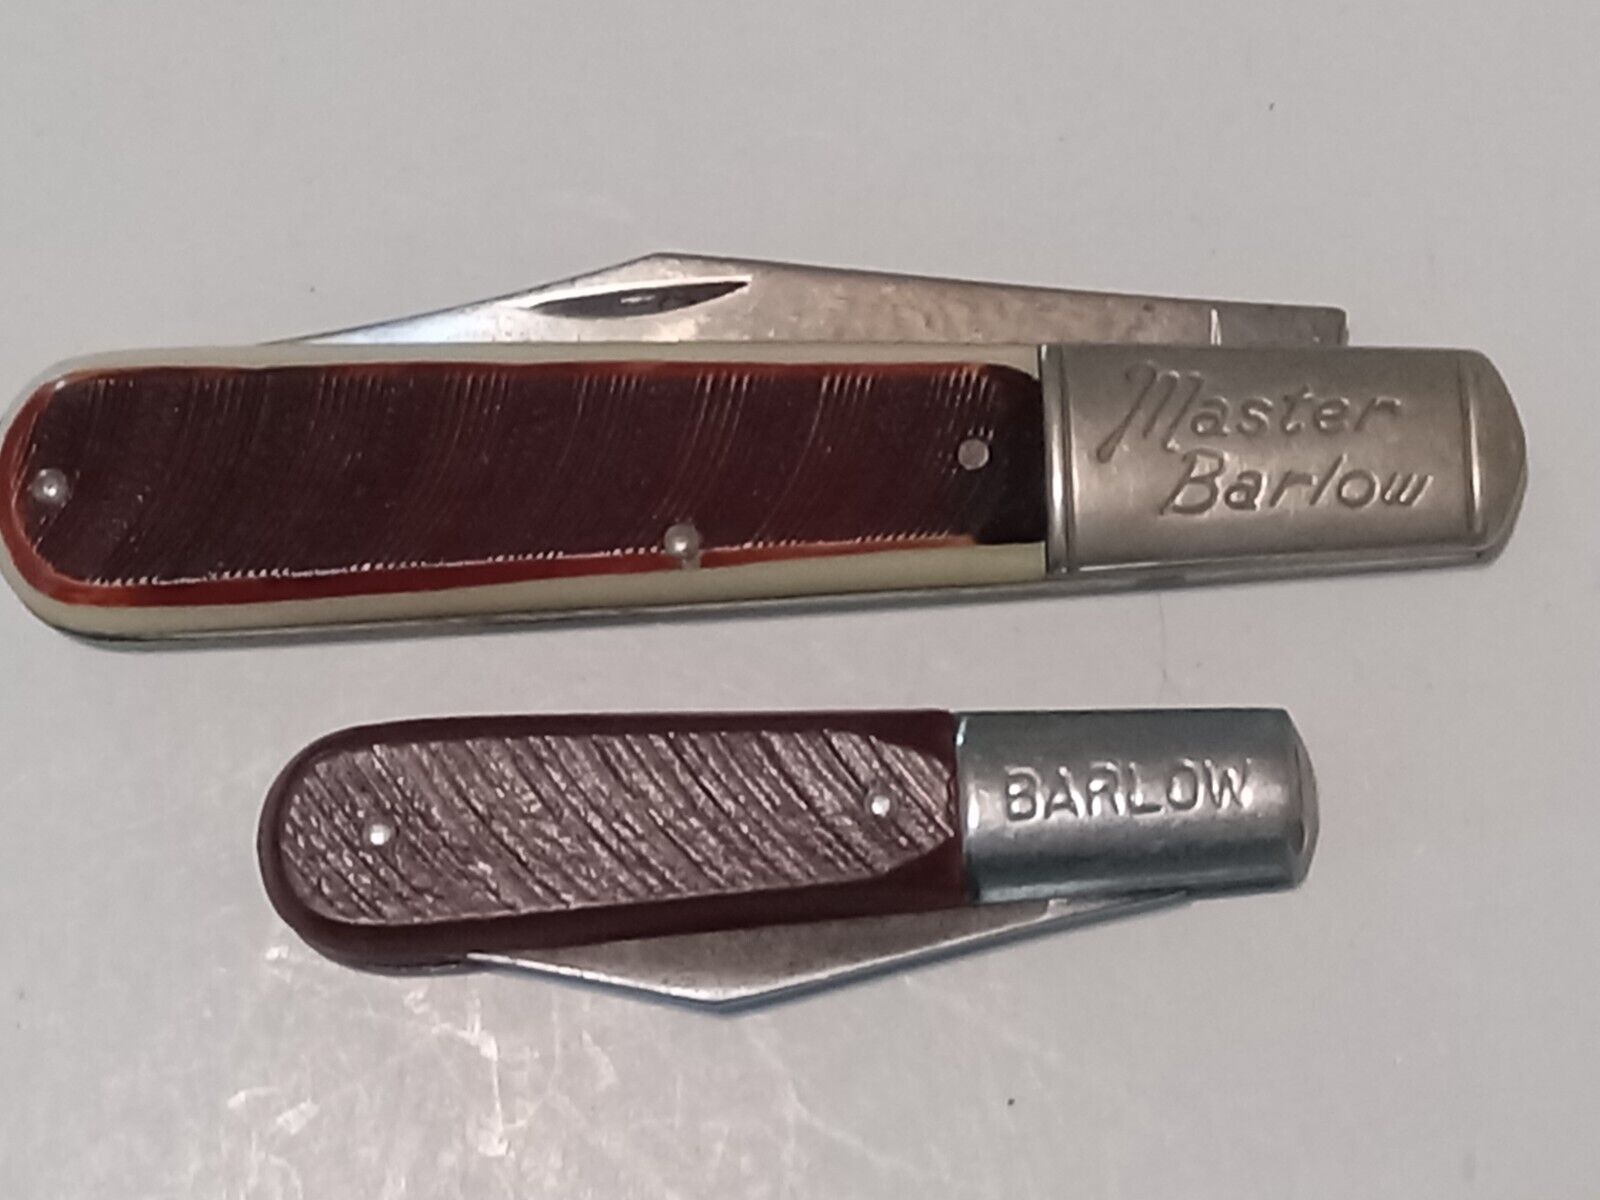 Colonial and Imperial Barlow pocket knives